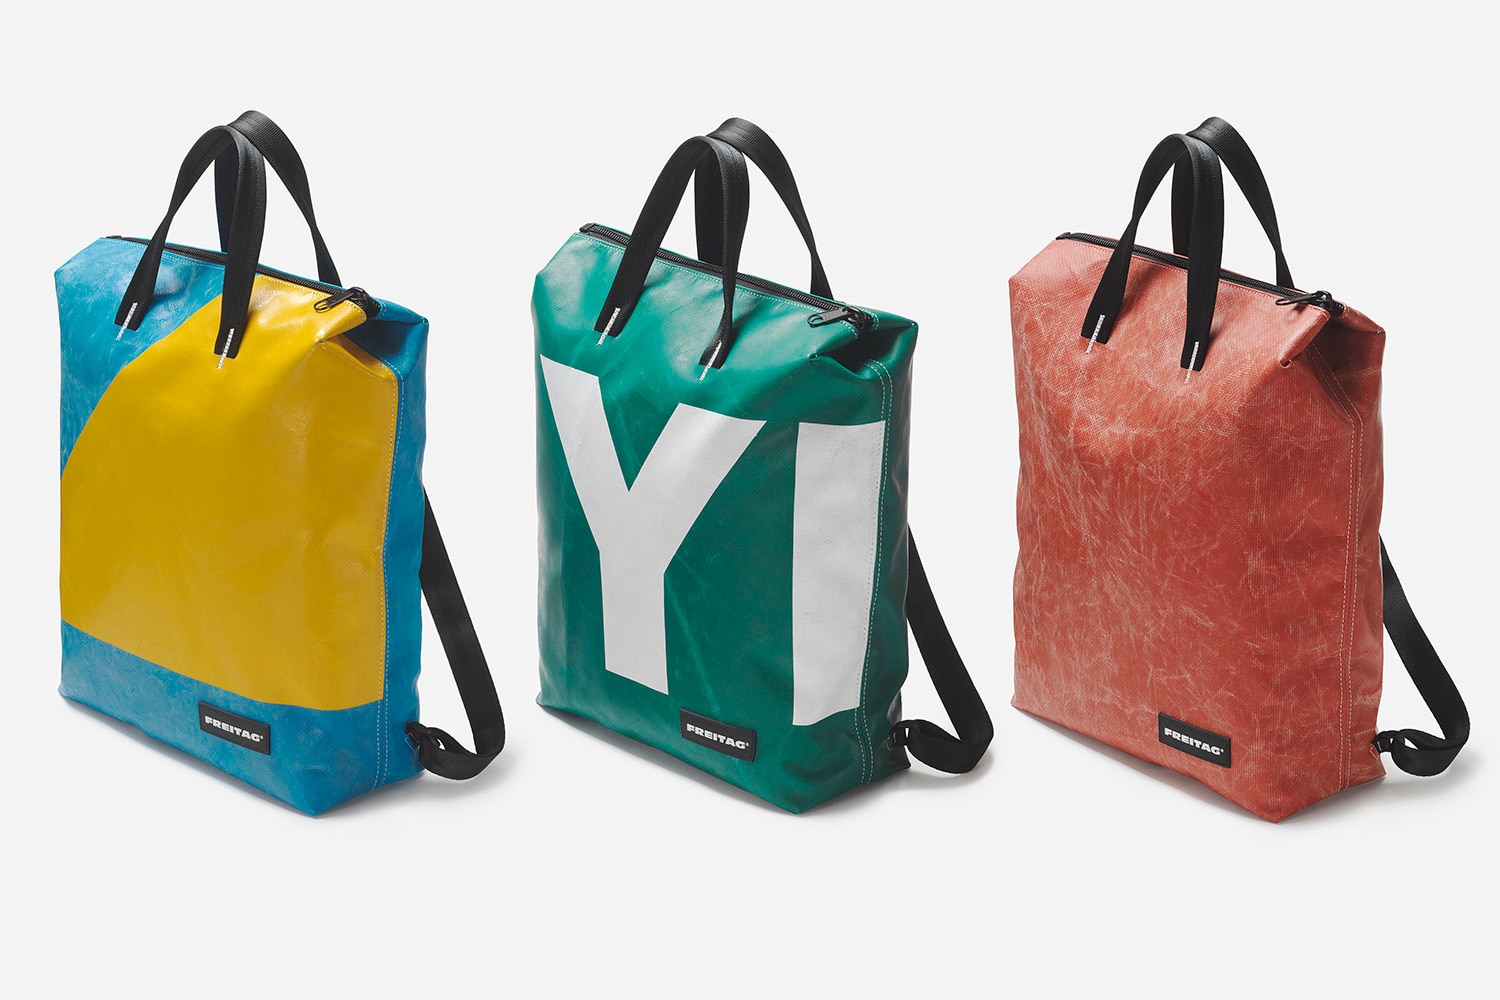 Blue, yellow, green, white, and red bags made from recycled car components